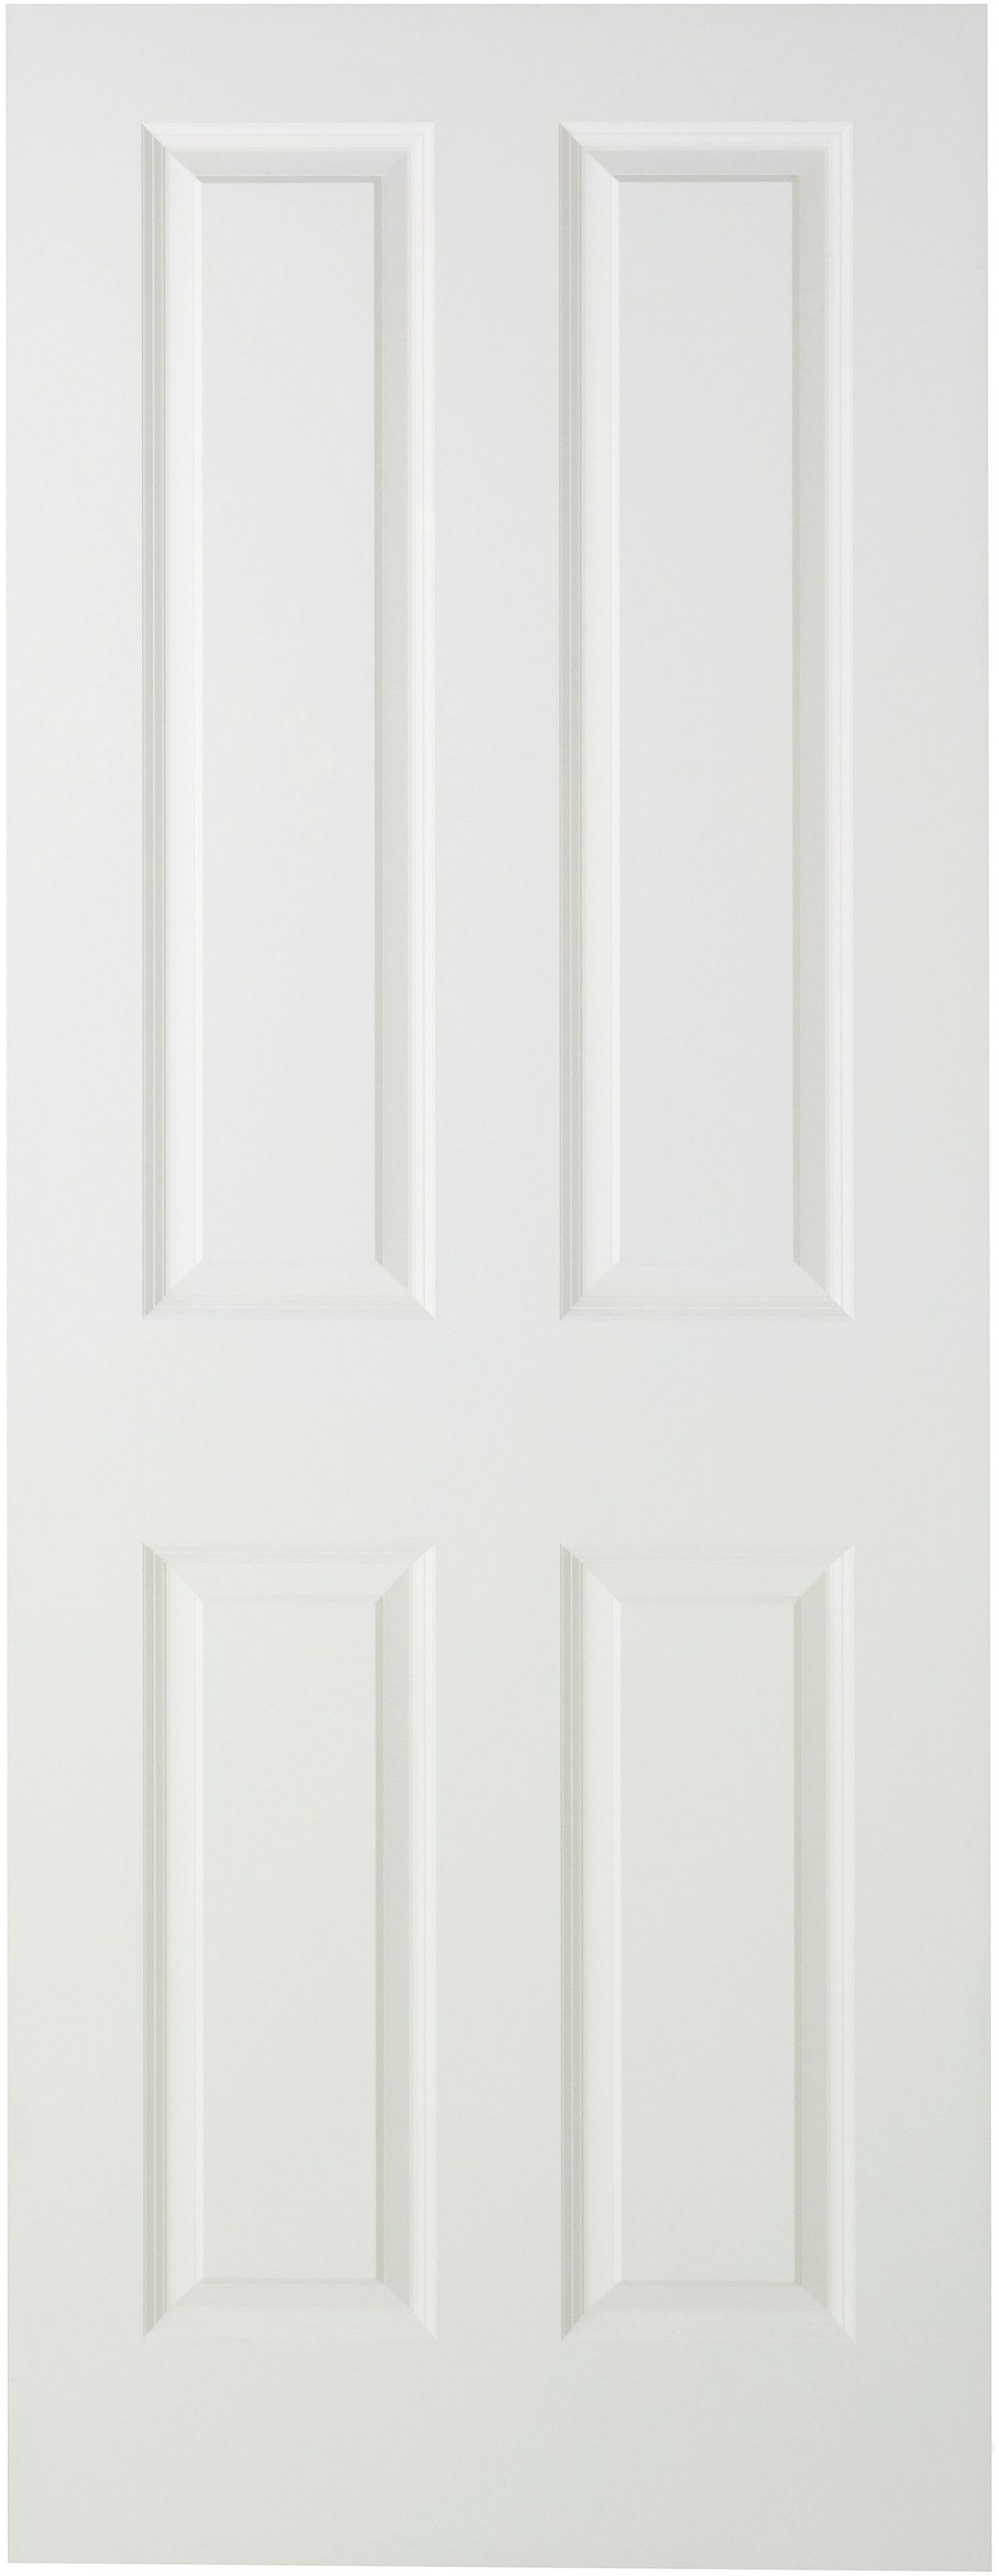 Wickes Chester White Smooth Moulded 4 Panel Internal